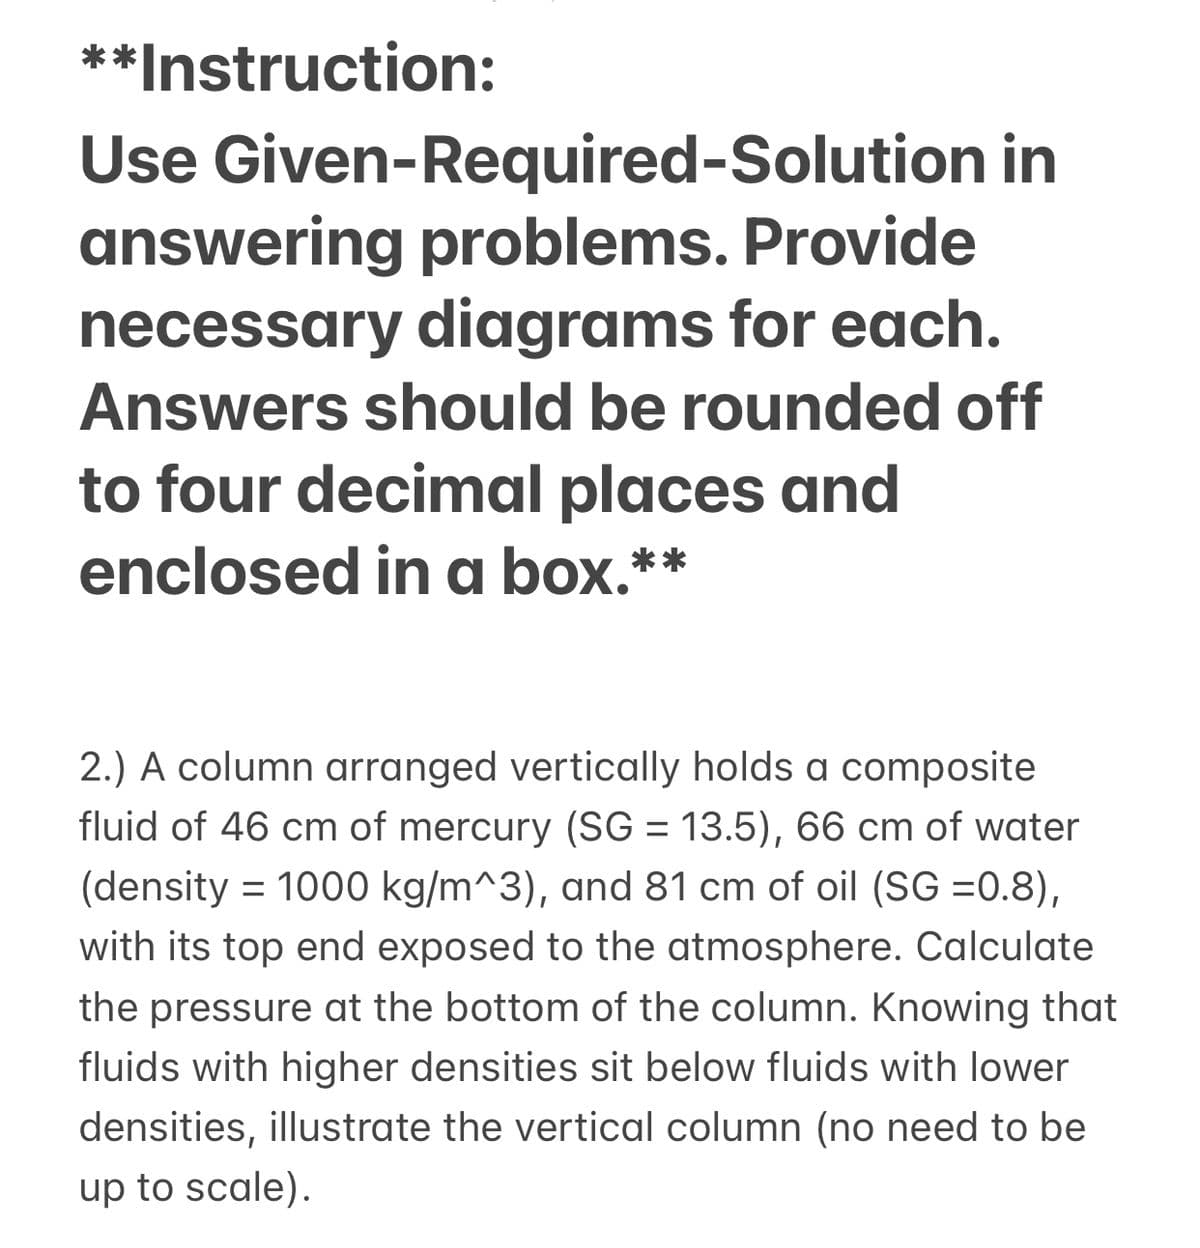 **Instruction:
Use Given-Required-Solution in
answering problems. Provide
necessary diagrams for each.
Answers should be rounded off
to four decimal places and
enclosed in a box.**
2.) A column arranged vertically holds a composite
fluid of 46 cm of mercury (SG = 13.5), 66 cm of water
%3D
(density = 1000 kg/m^3), and 81 cm of oil (SG =0.8),
with its top end exposed to the atmosphere. Calculate
the pressure at the bottom of the column. Knowing that
fluids with higher densities sit below fluids with lower
densities, illustrate the vertical column (no need to be
up to scale).
